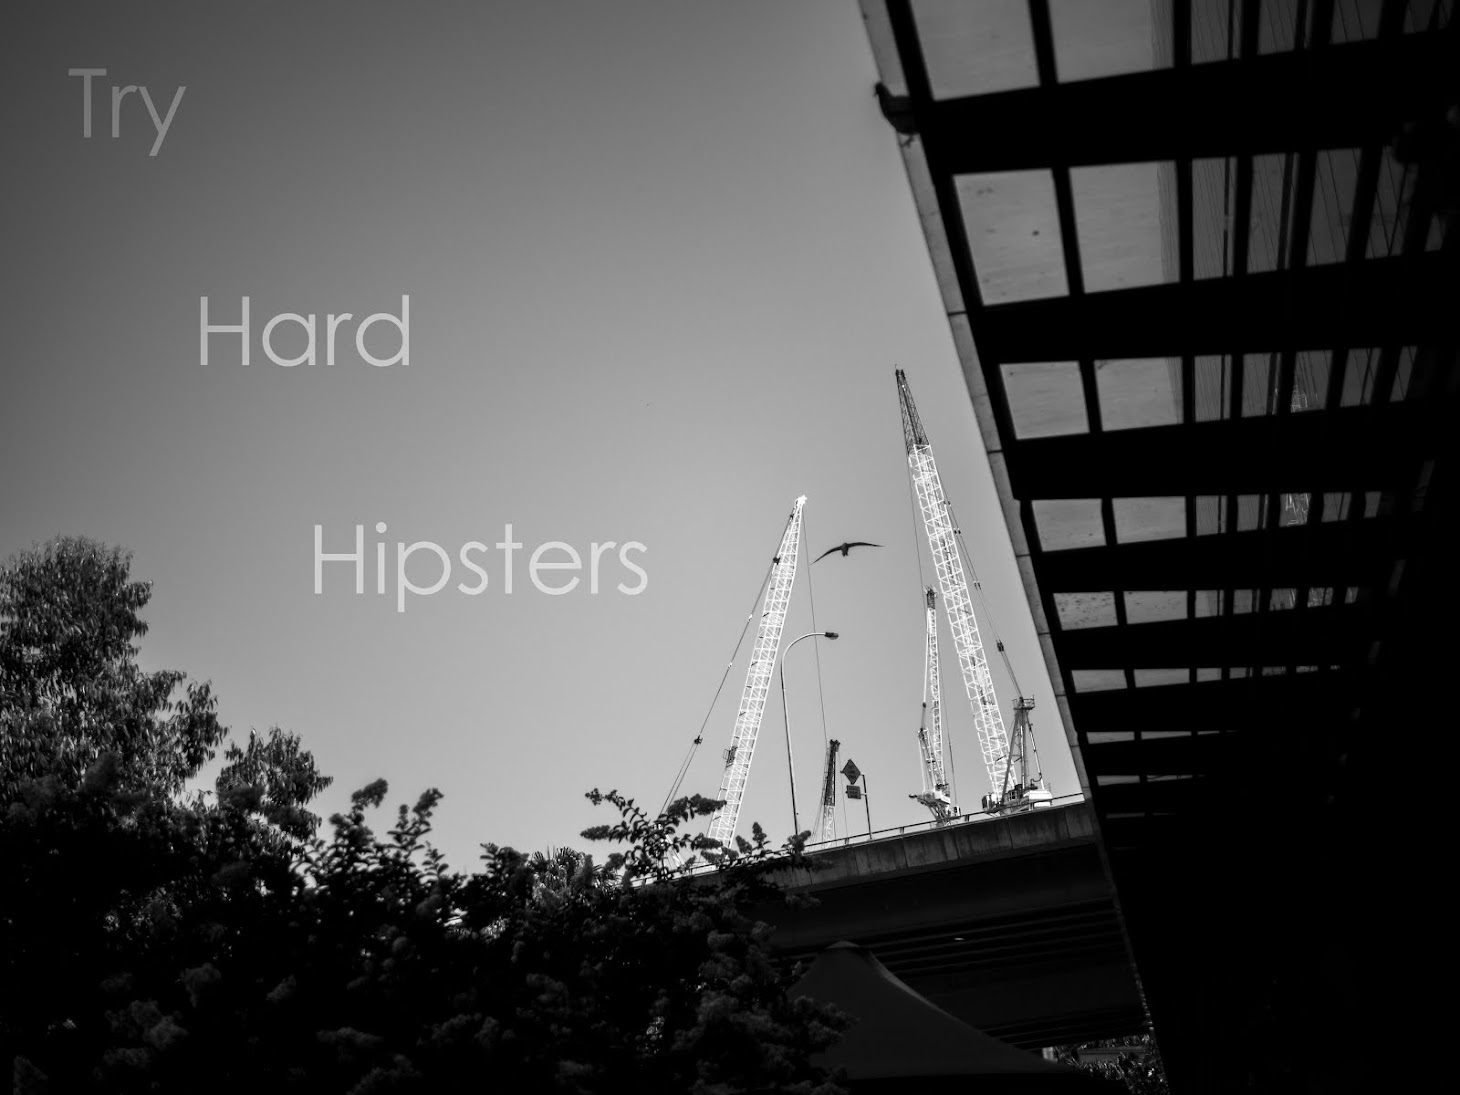 Try Hard Hipsters